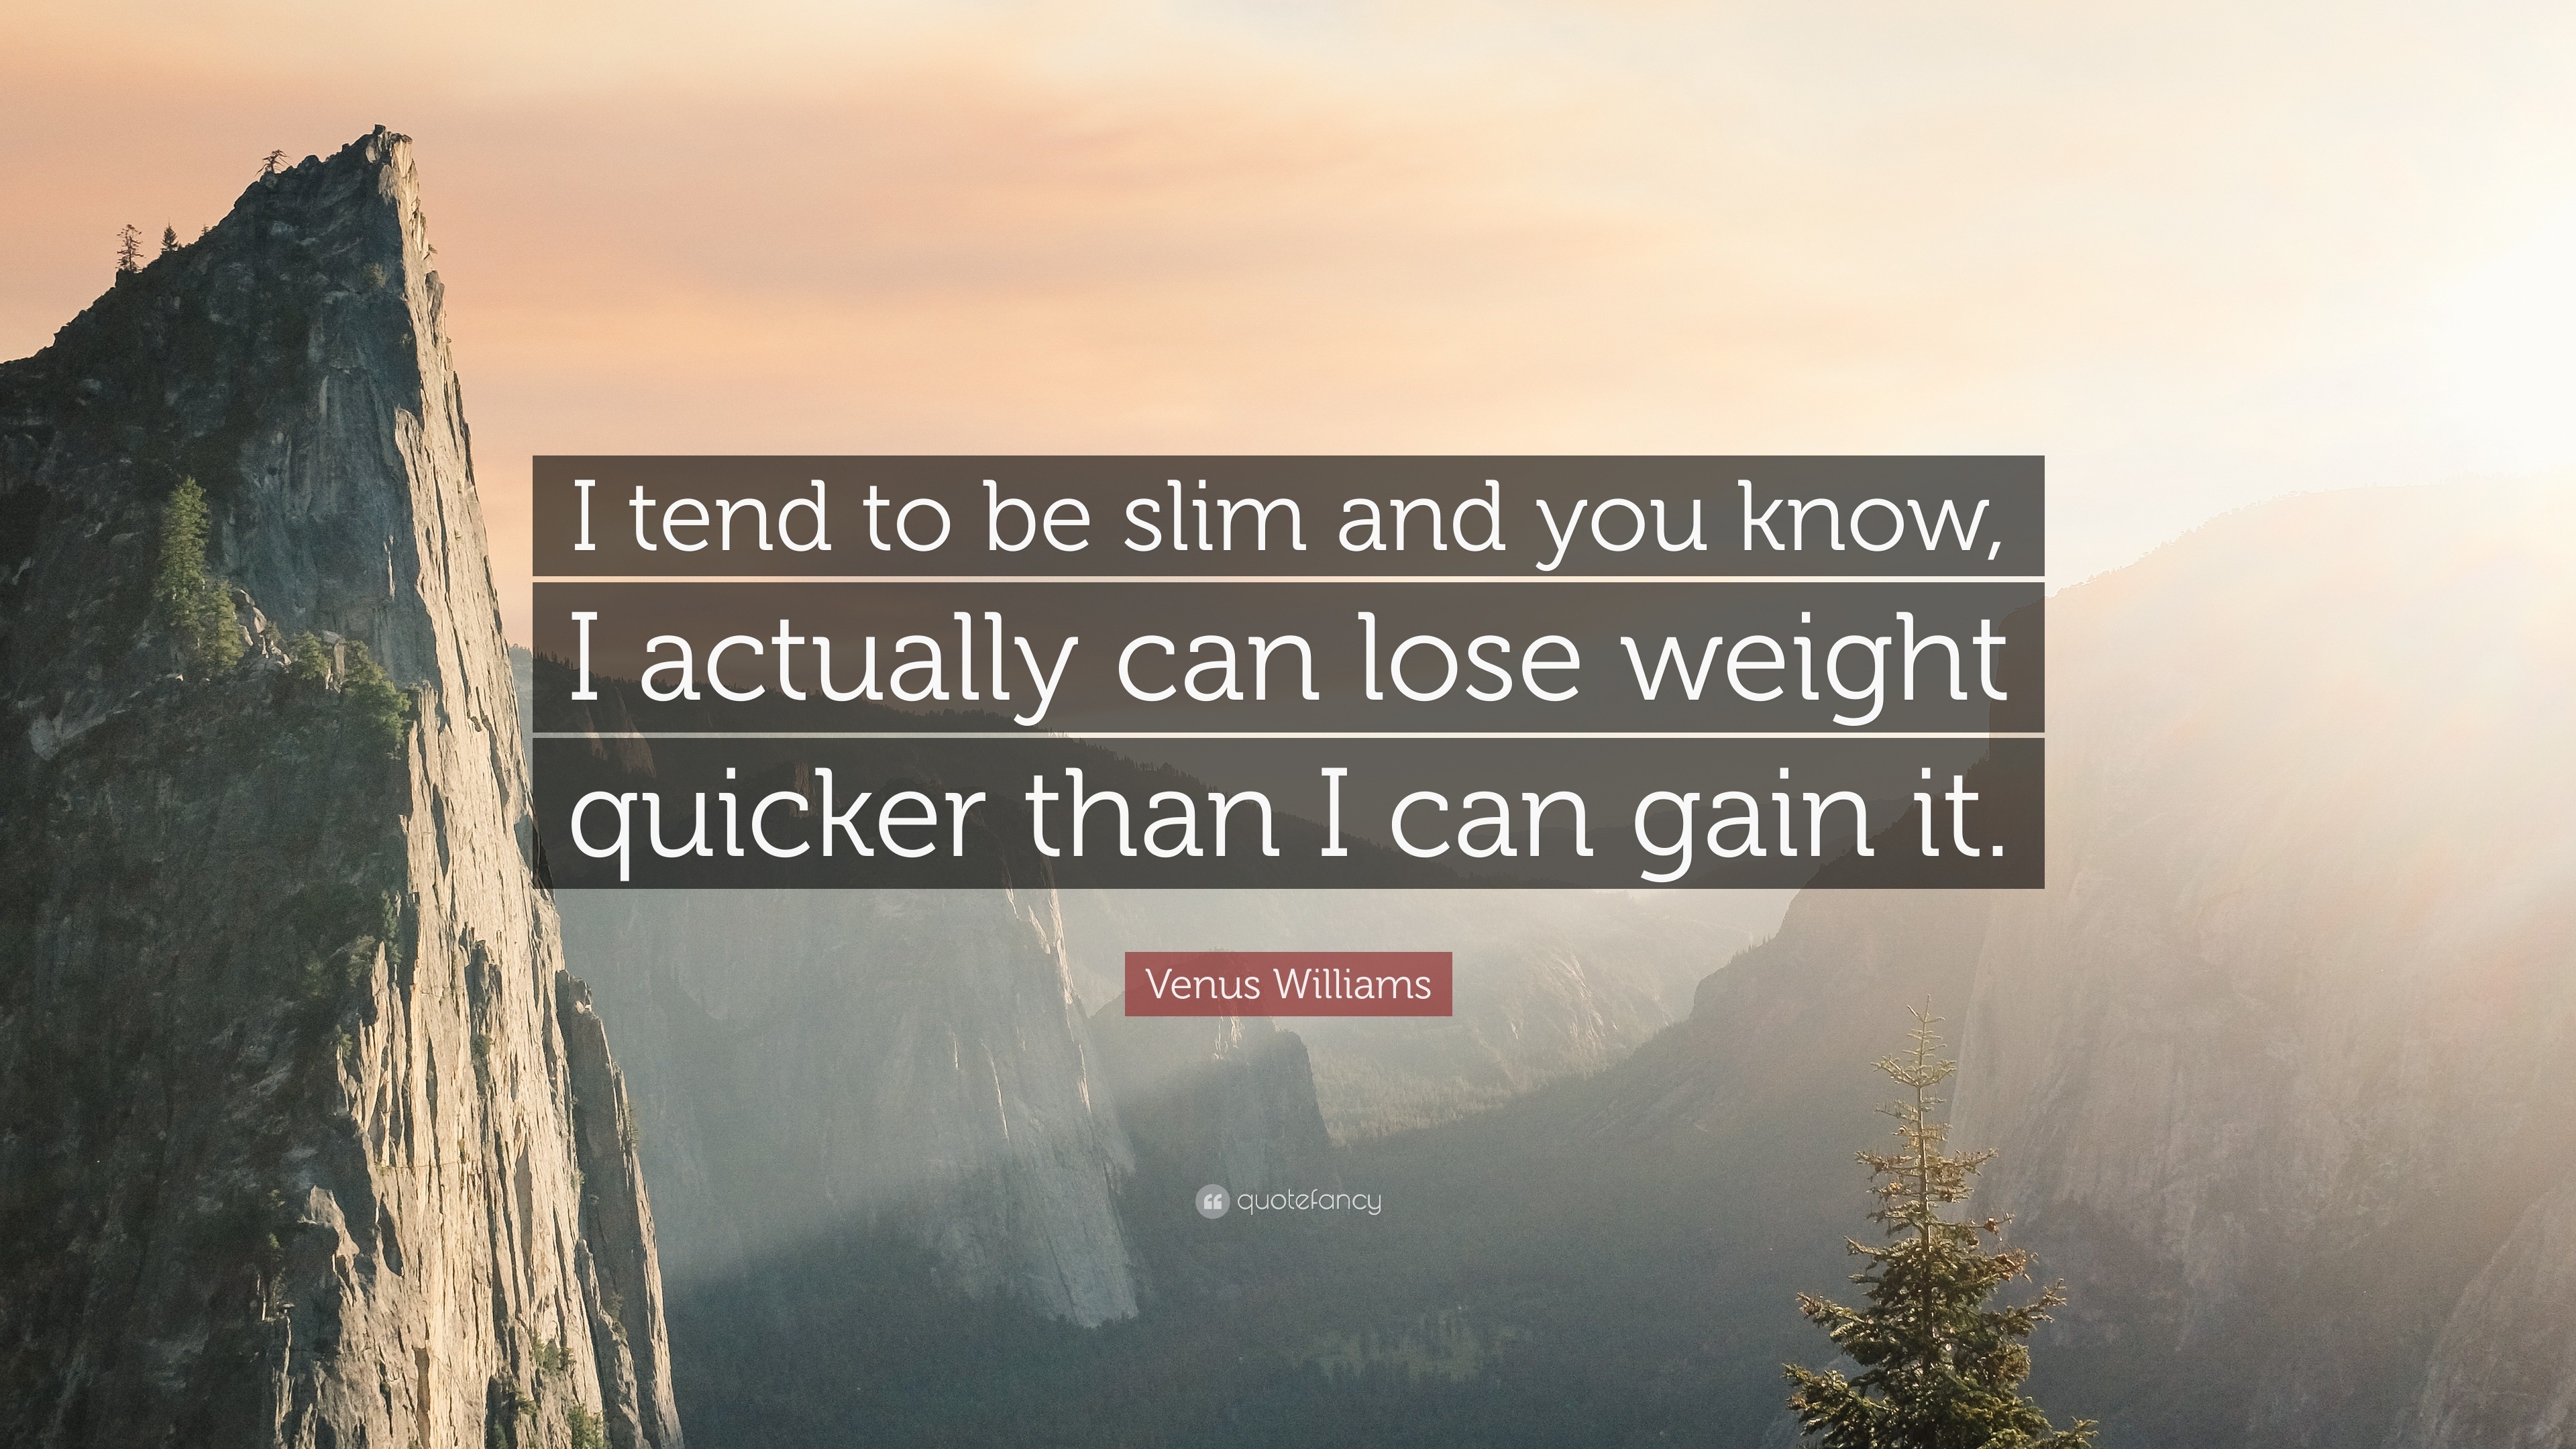 I want to be slim